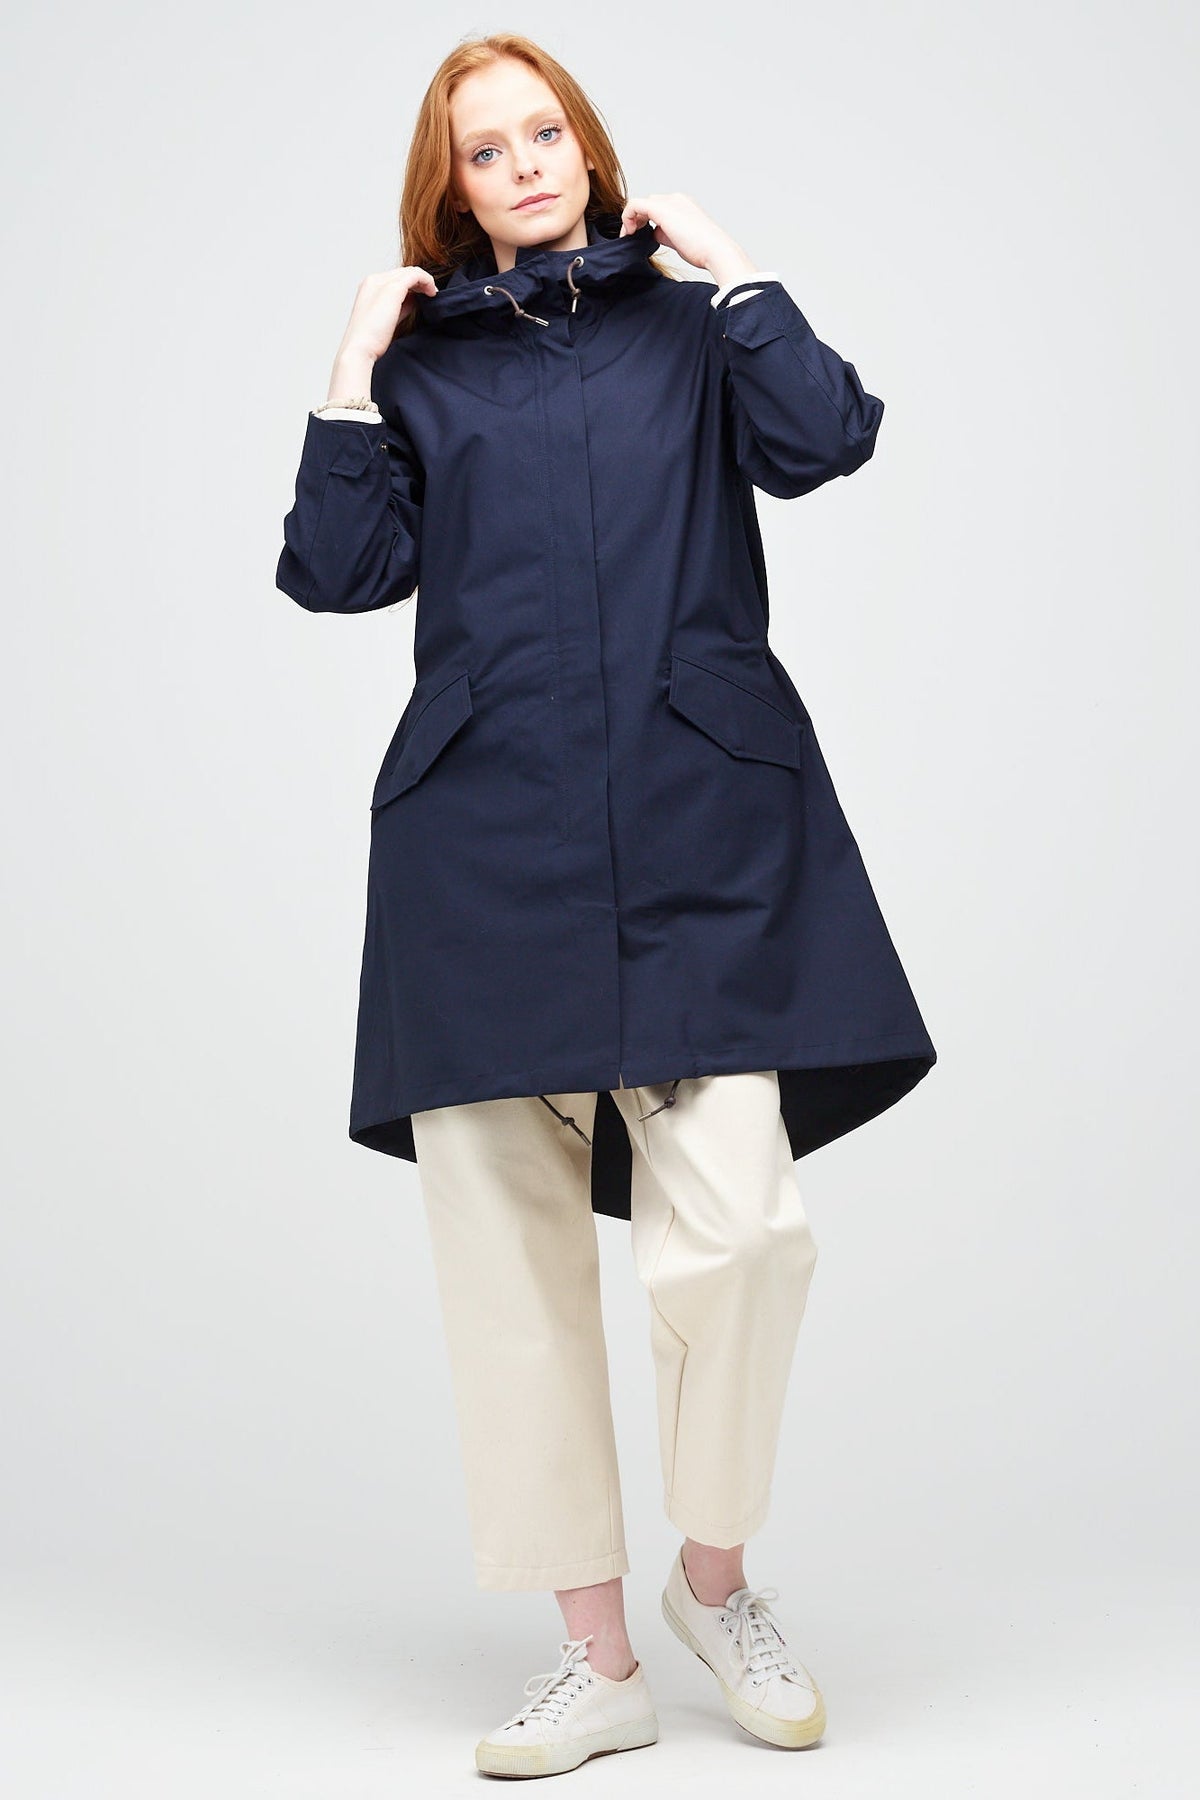 
            A young, white female model with ginger hair wearing a long navy parka fully zipped up. The parka is styled with ecru jeans and white trainers..